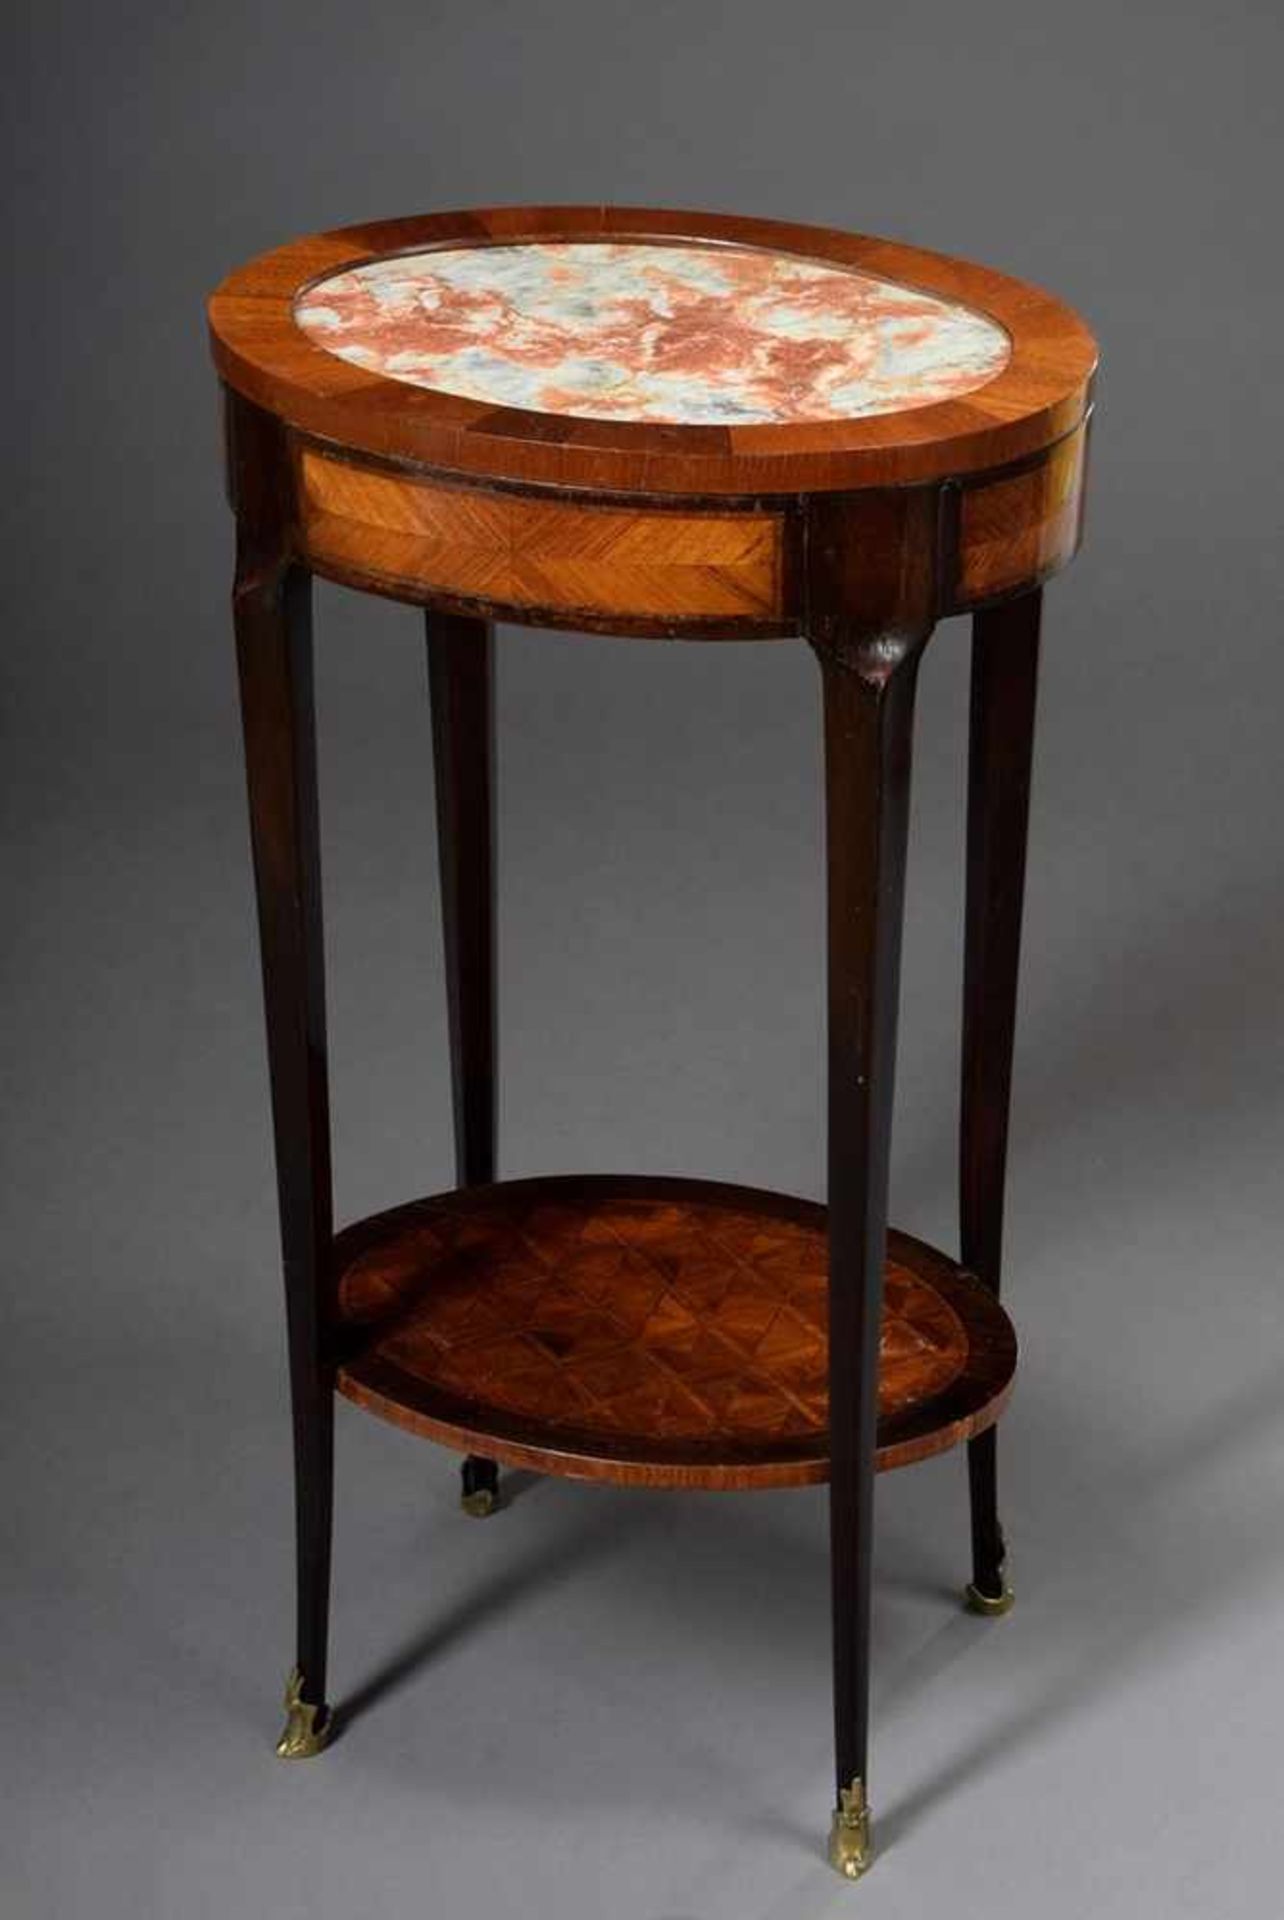 Oval "Table tricoteuse" with white-reddish marble top and optical marquetry, on curved legs with - Image 2 of 8